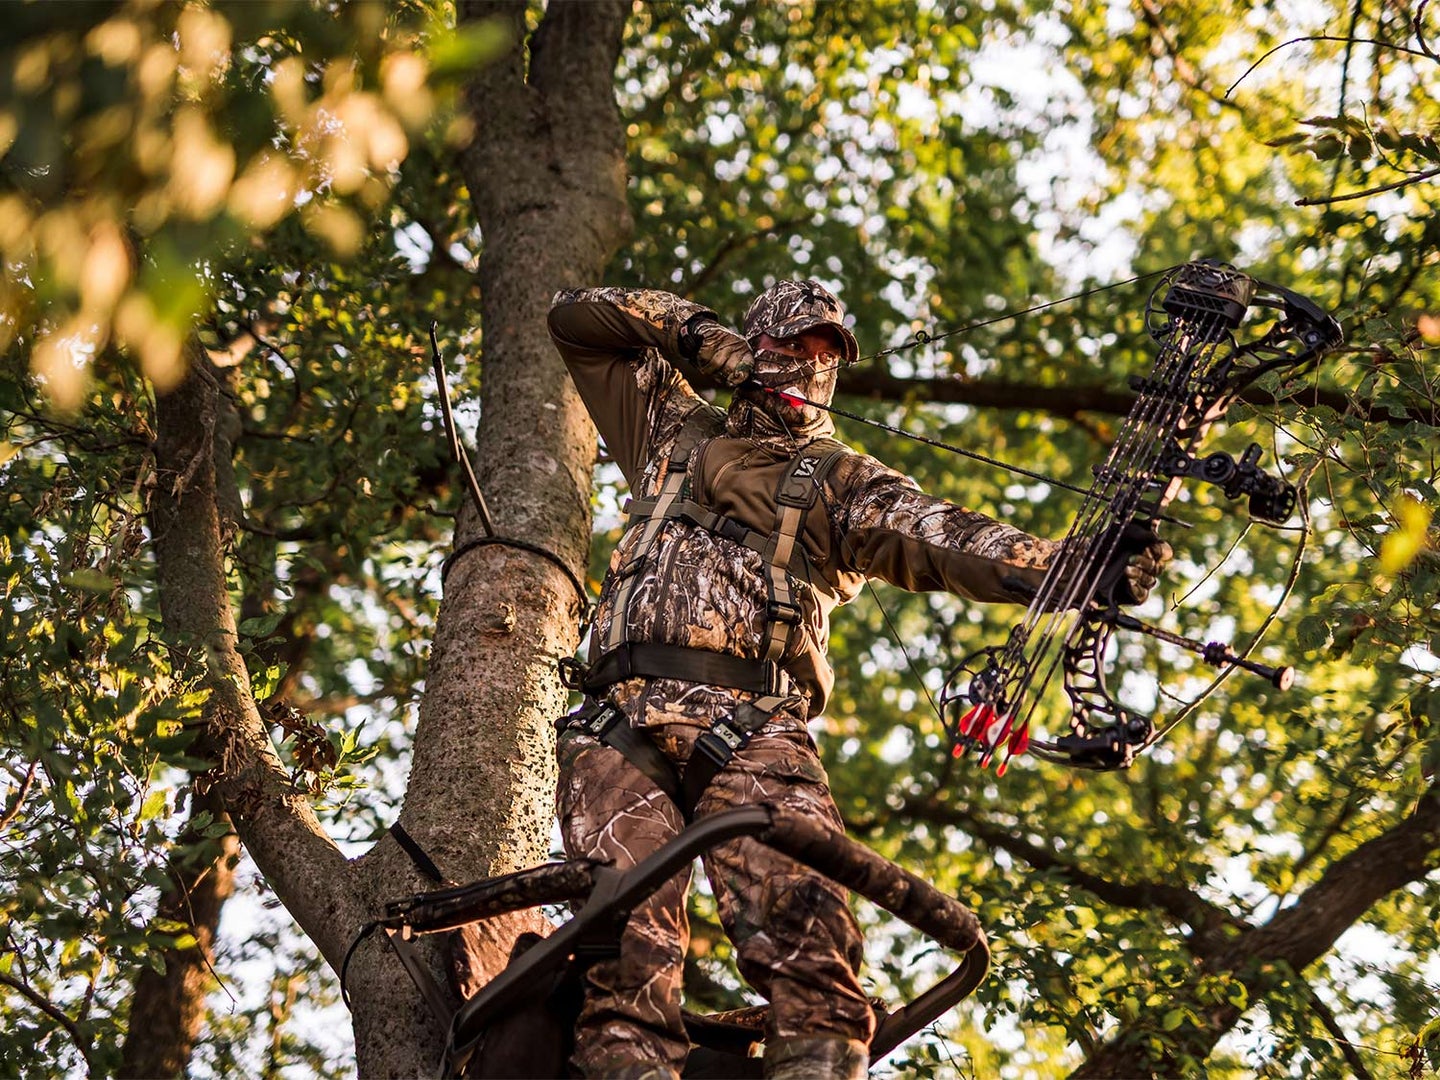 A hunter drawing on a crossbow on a hunt stand in a tree.